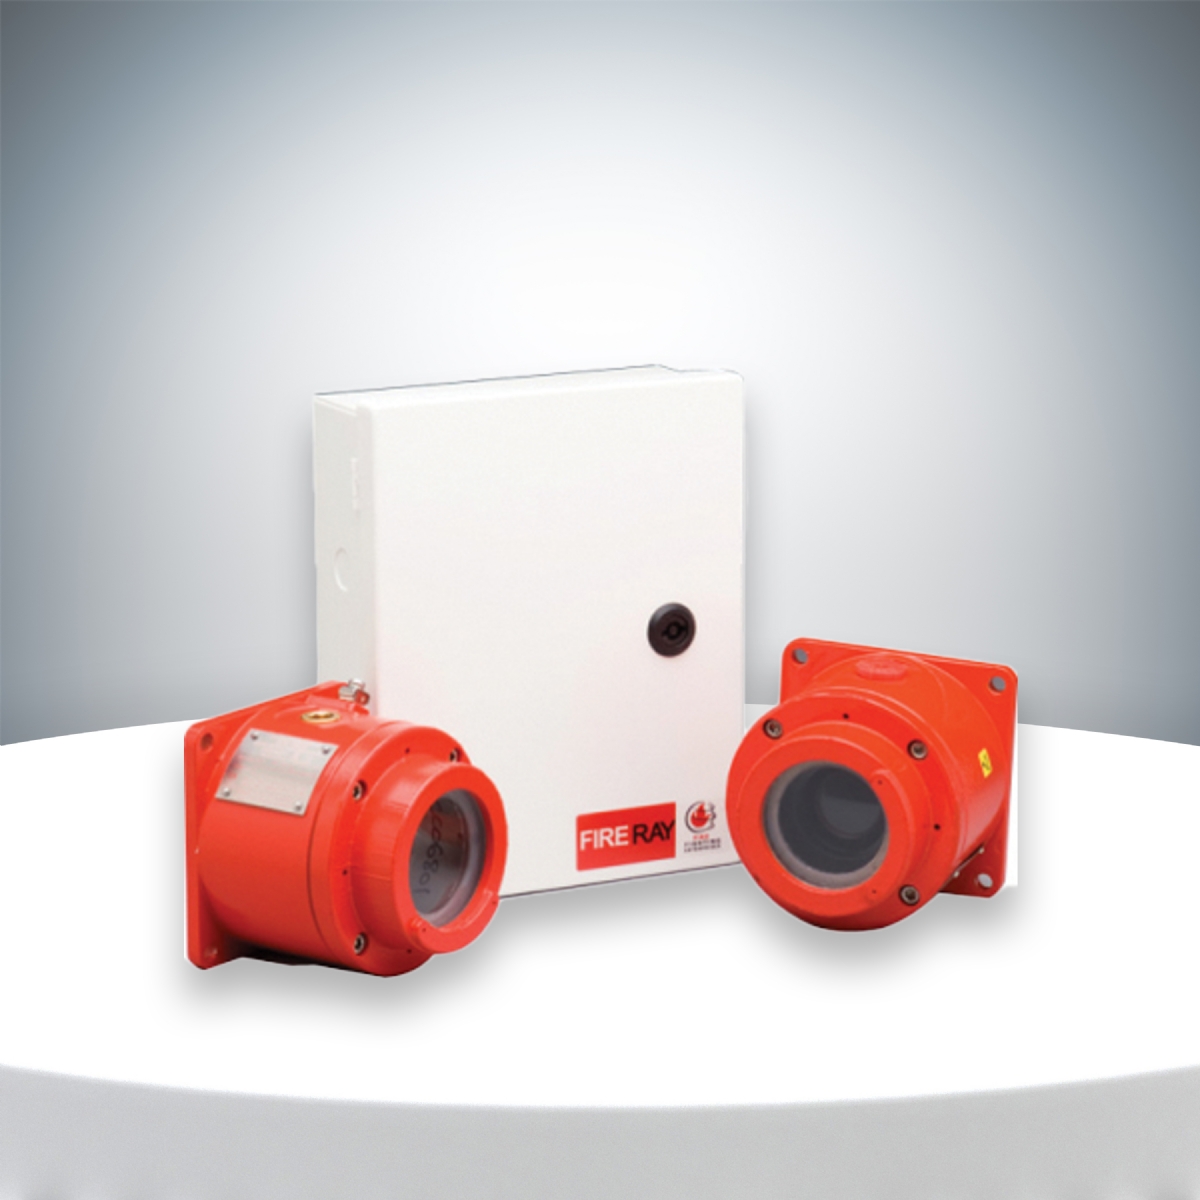 Ex-Proof Ultraviolet and Infrared Flame Detector